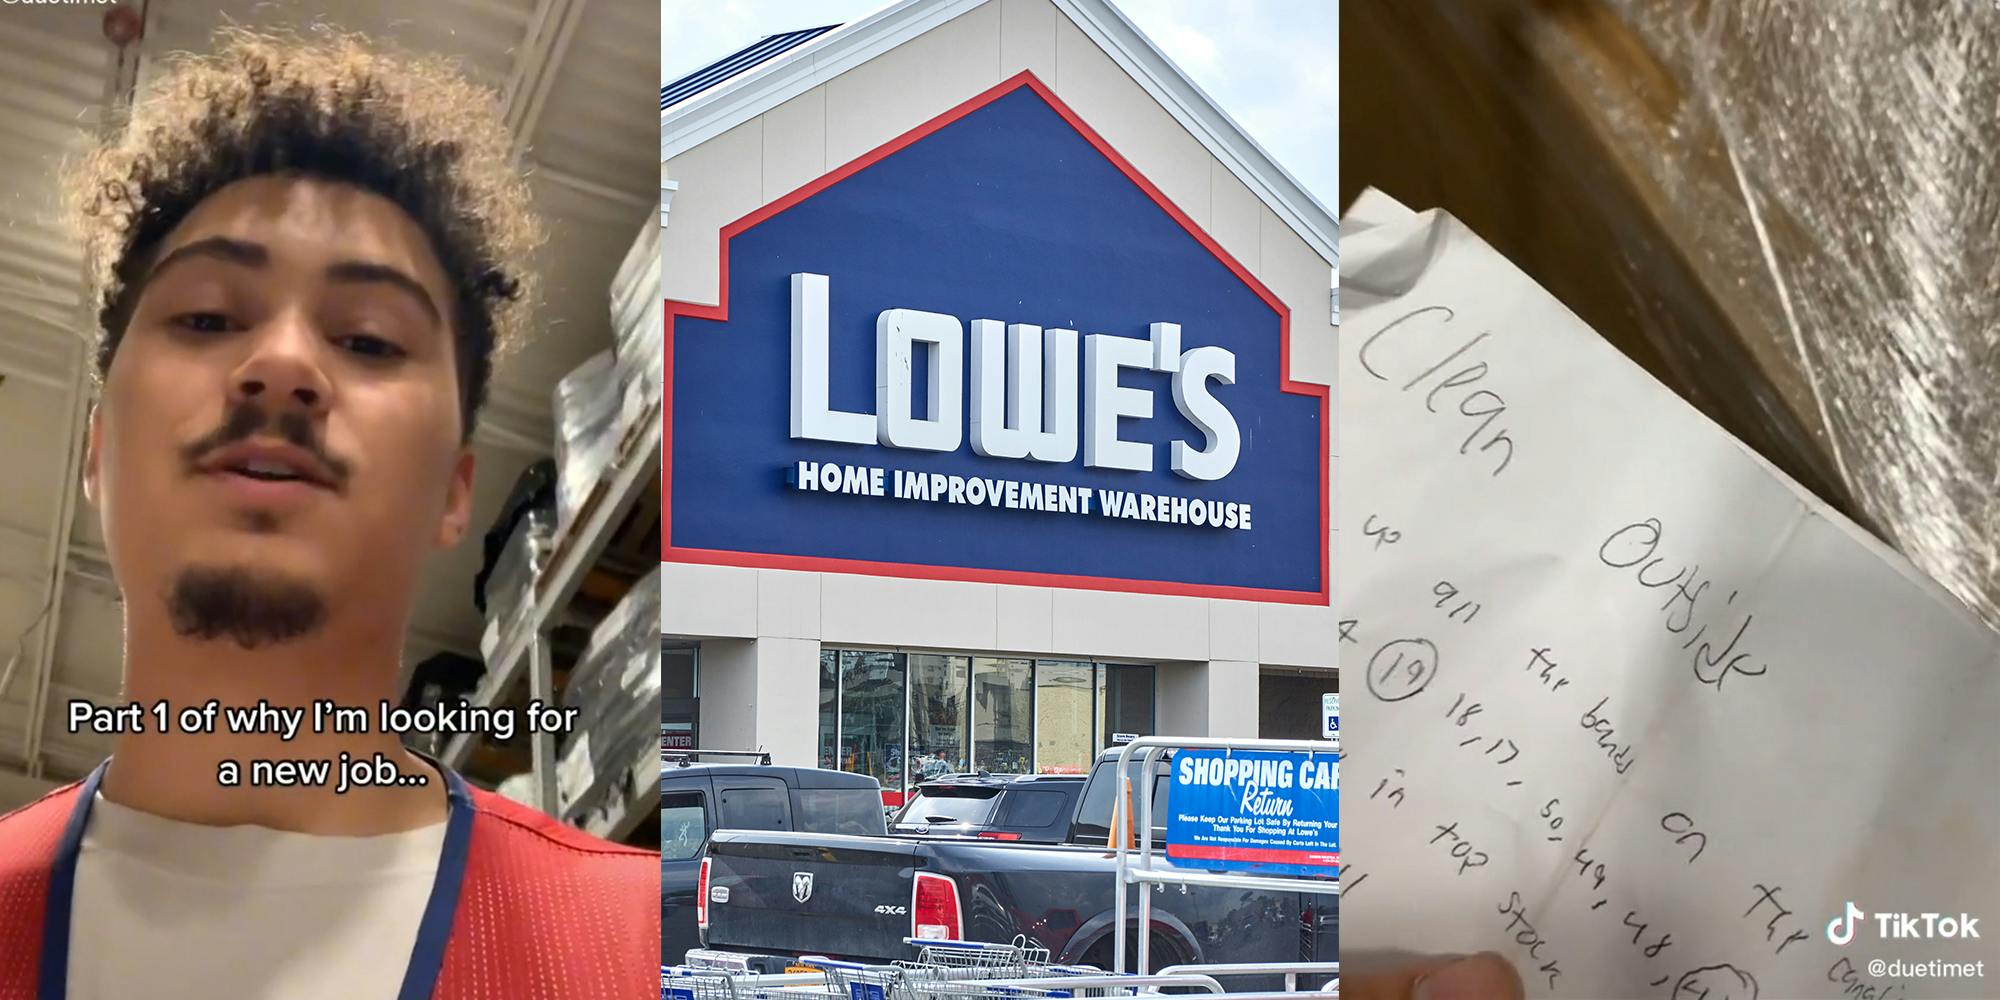 man in Lowe's with caption "Part 1 of why I'm looking for a new job.." (l) Lowe's storefront (c) note with "Clean outside" hand-written (r)